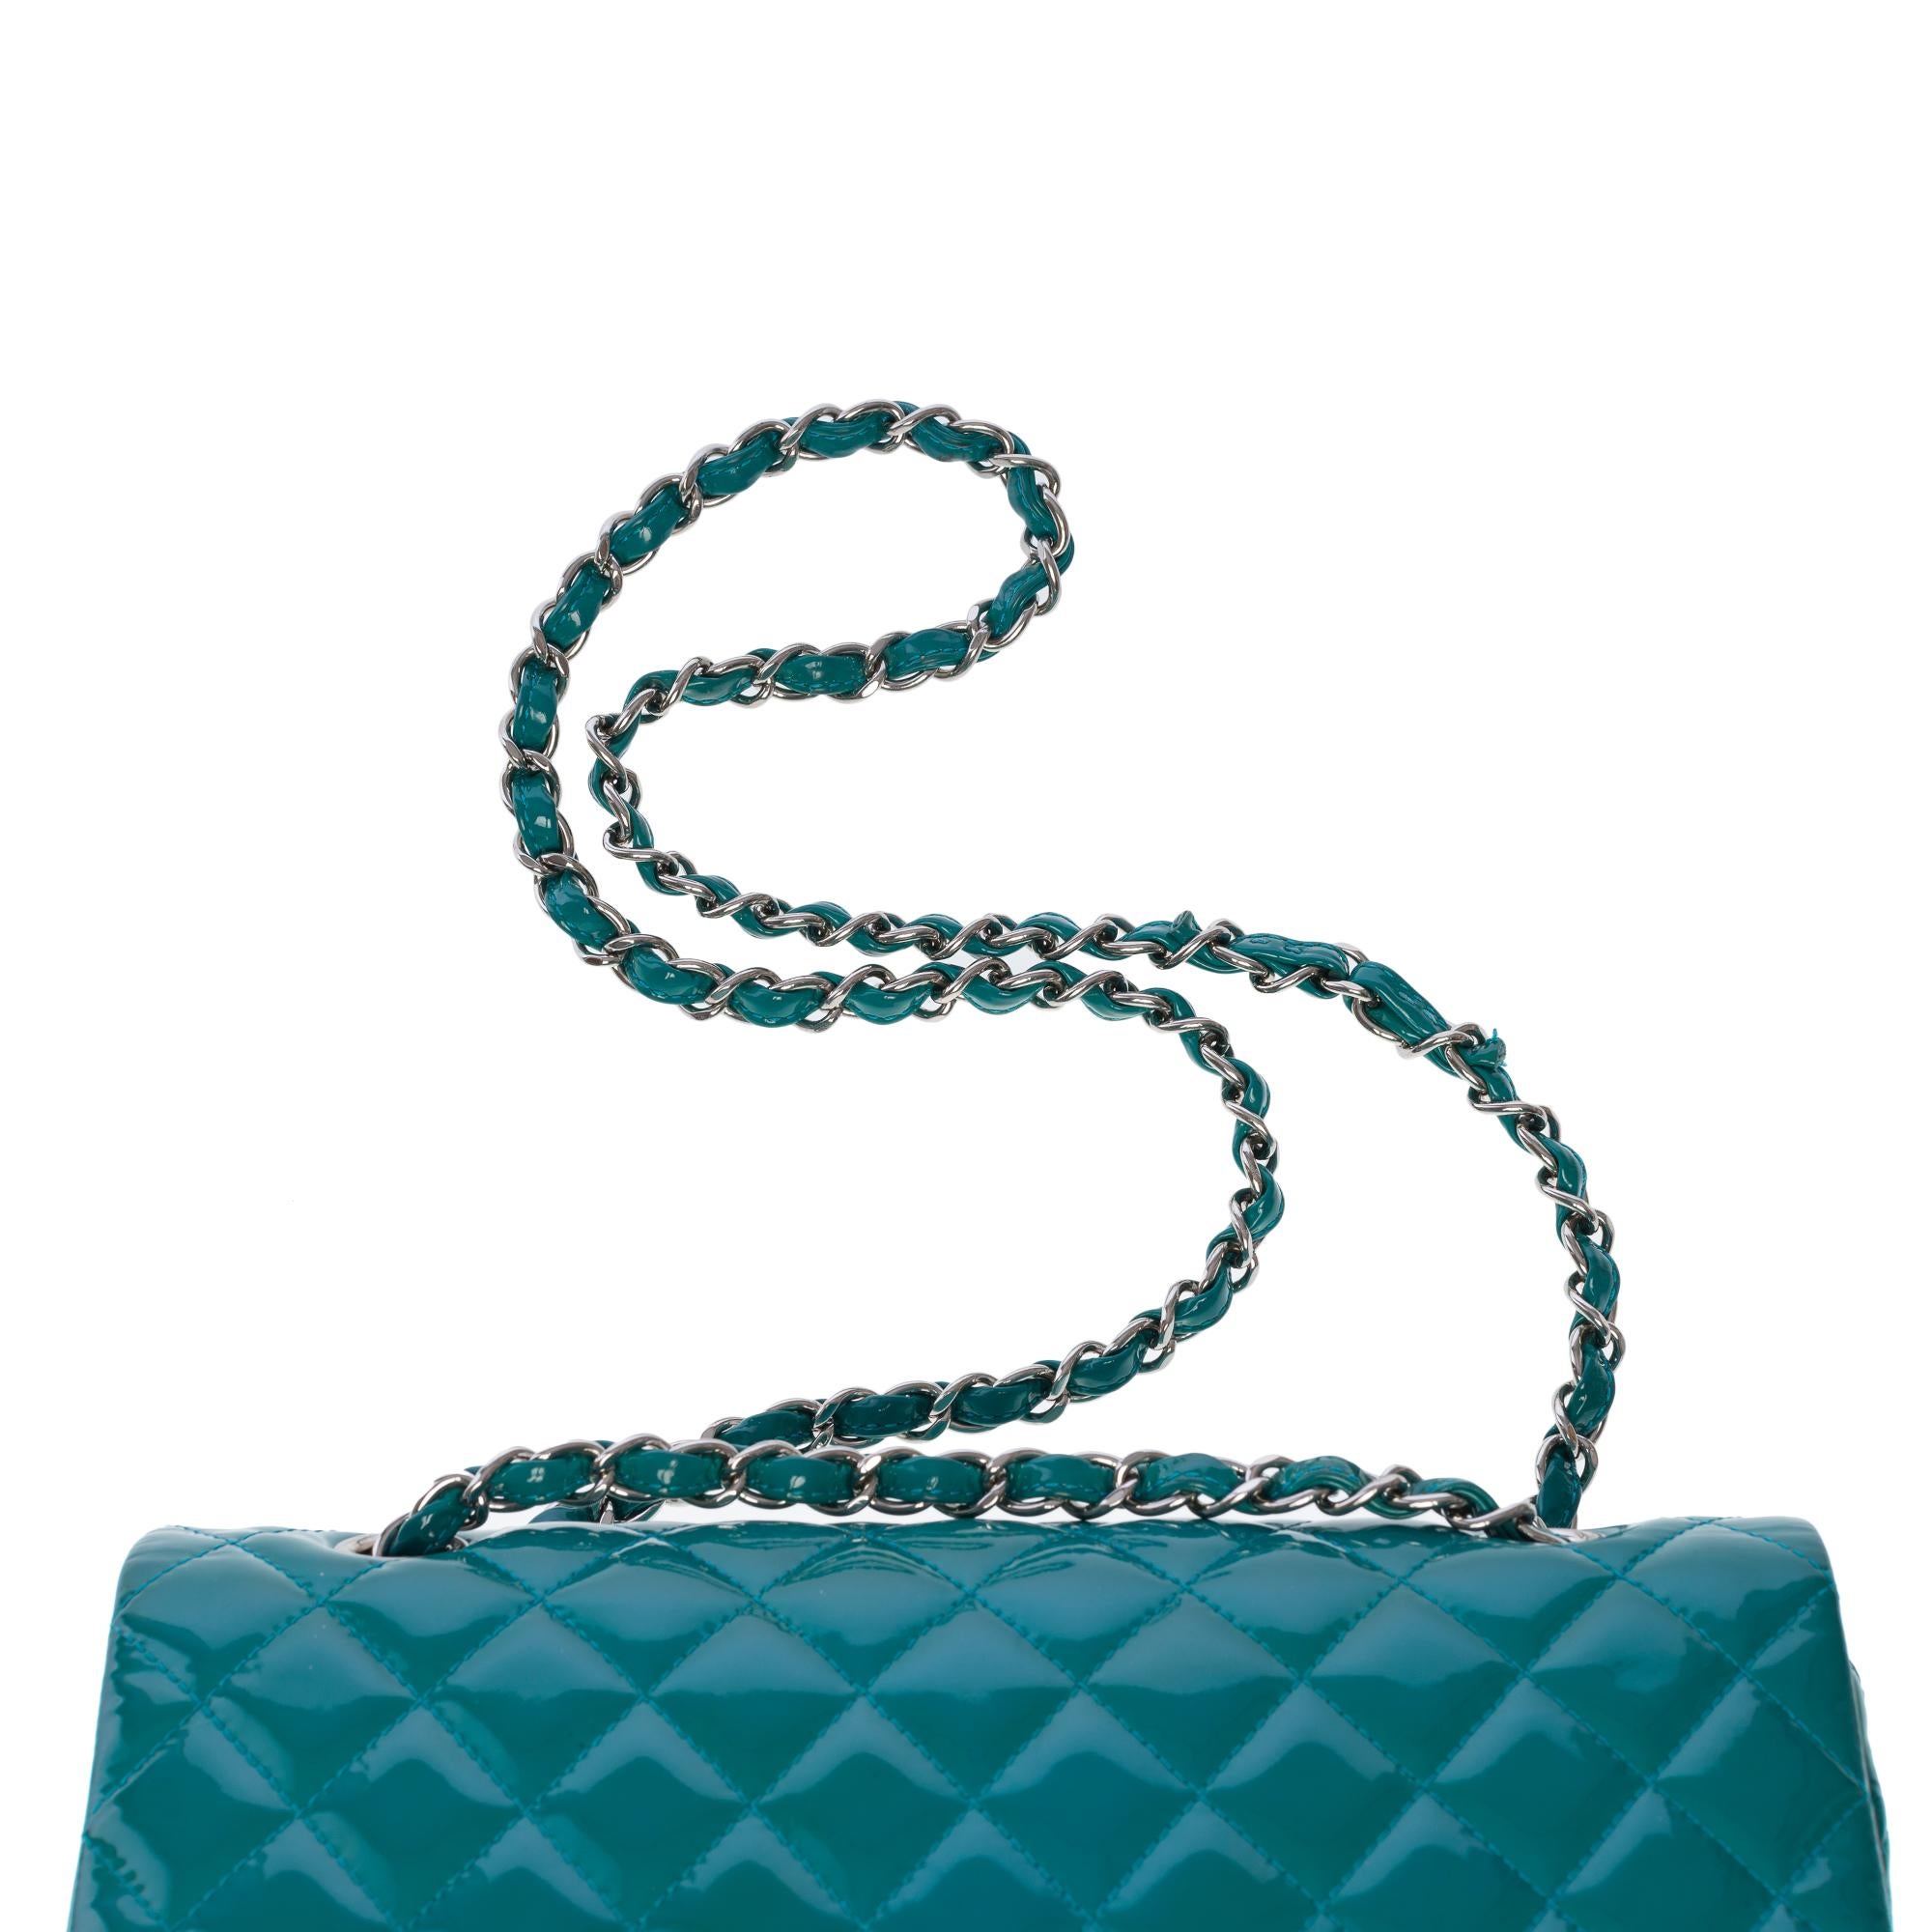 Chanel Timeless double flap shoulder bag in Blue quilted patent leather, SHW For Sale 5